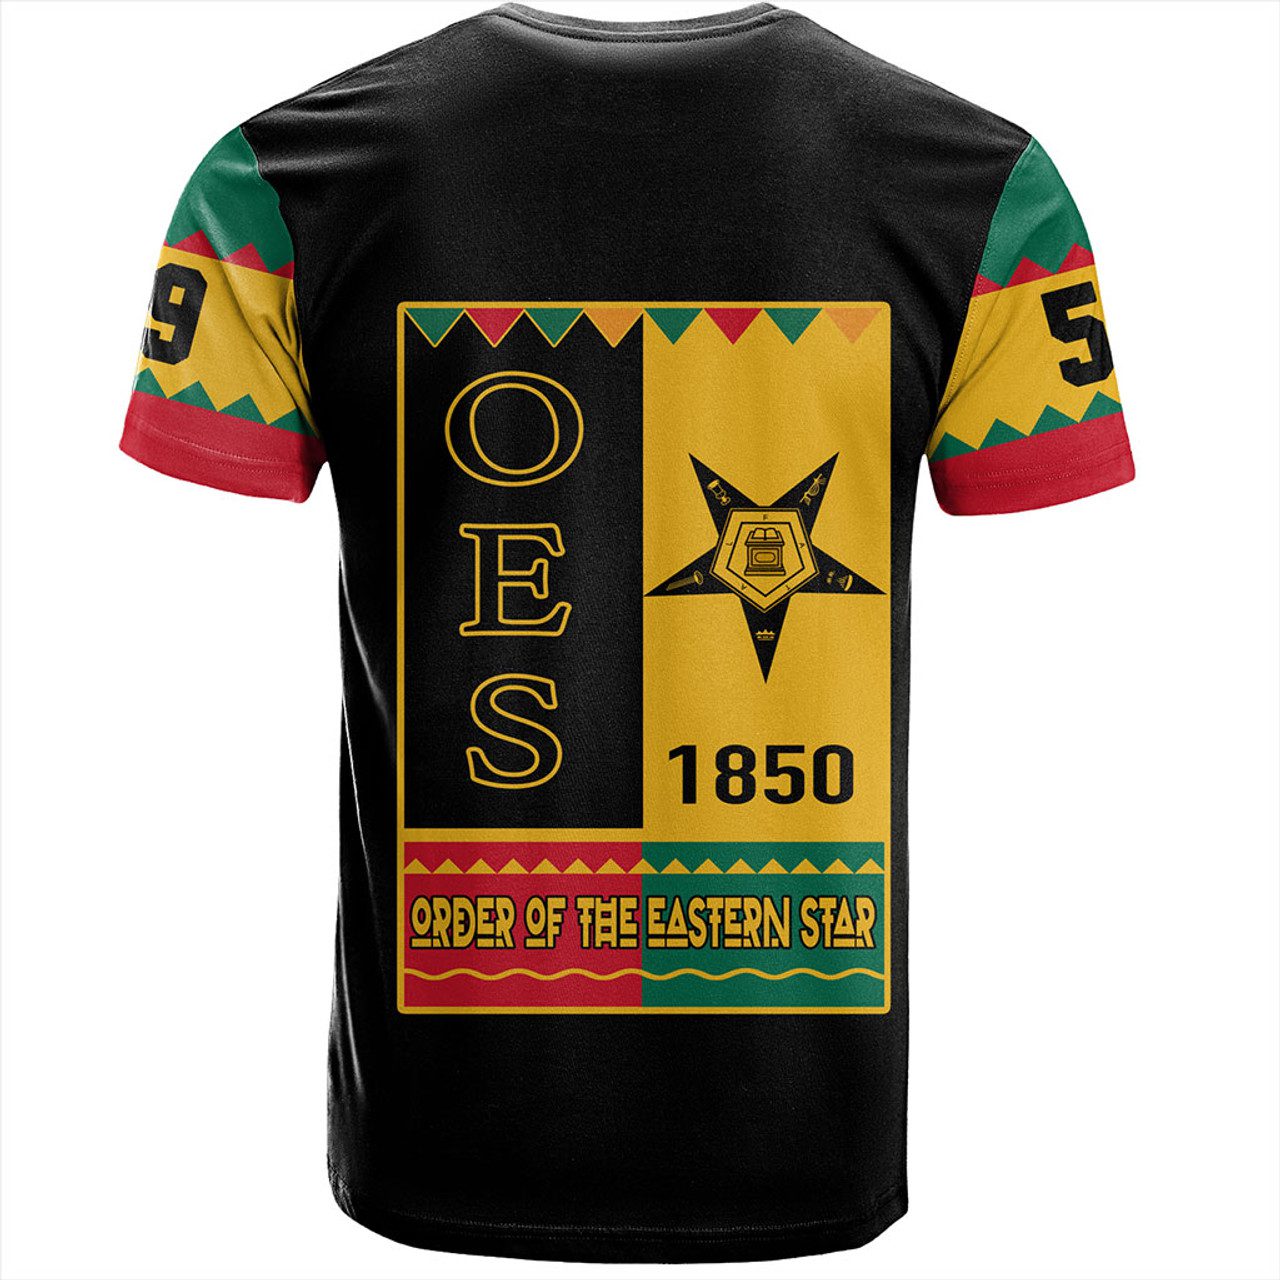 Order of the Eastern Star T-Shirt Black History Month